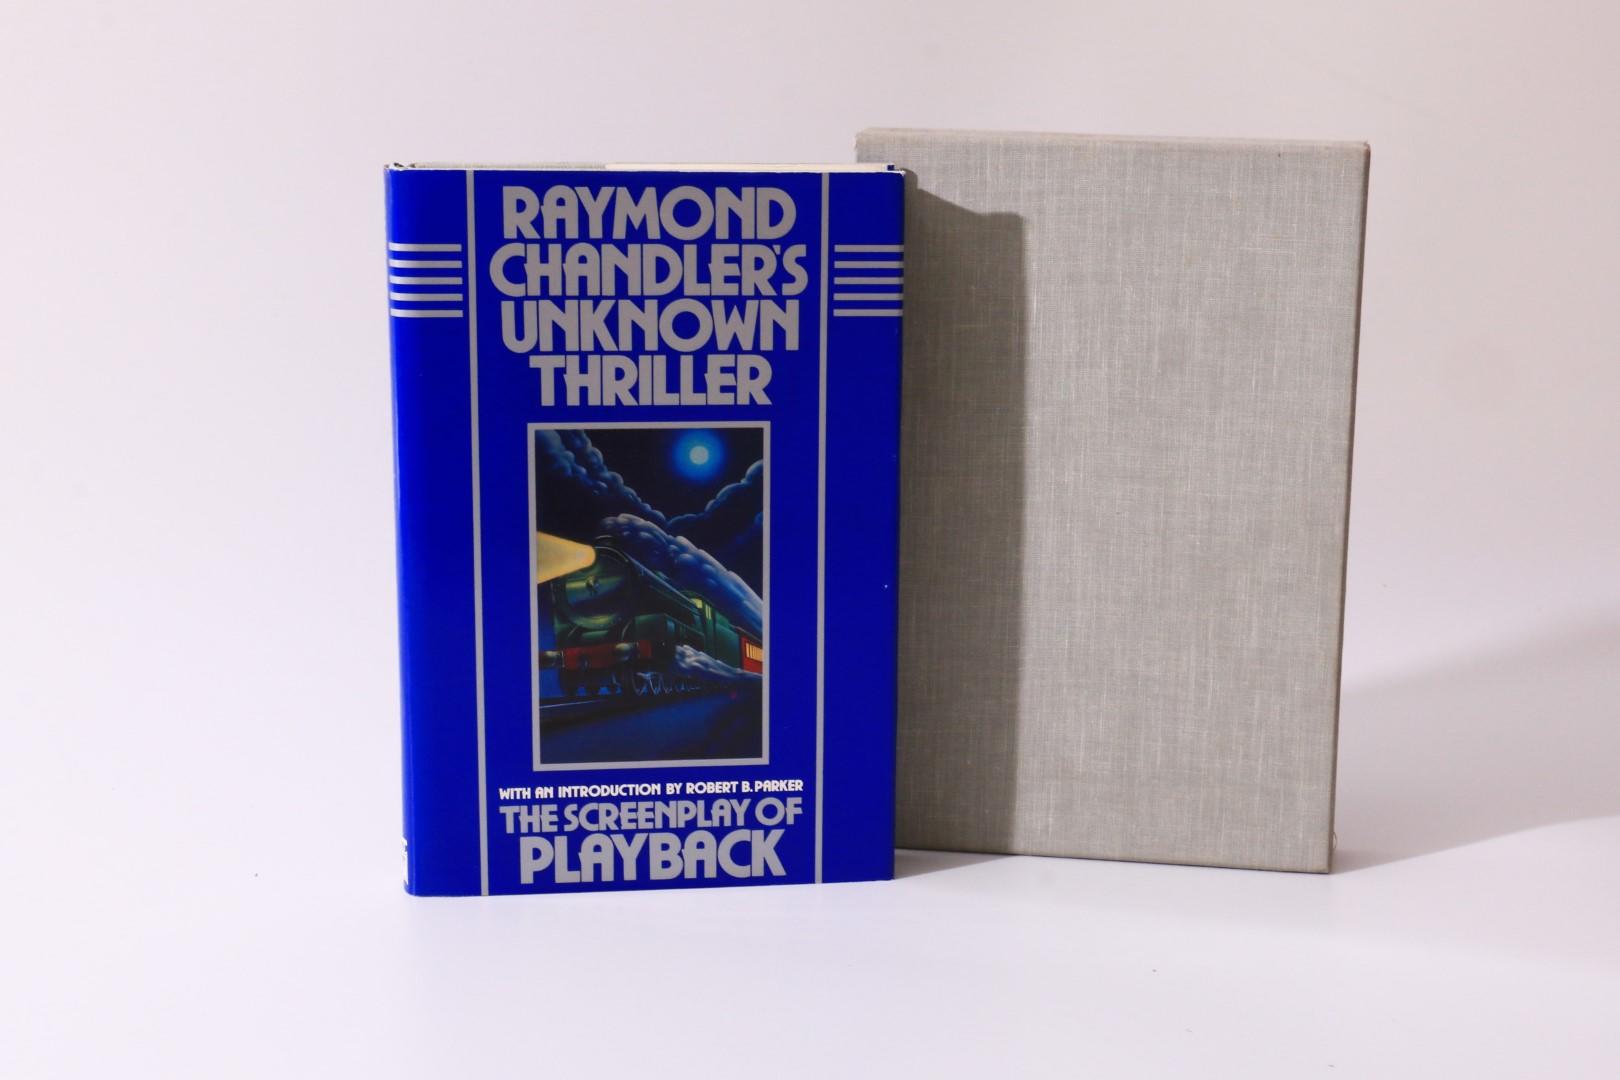 Raymond Chandler - Raymond Chandler's Unknown Thriller: The Screenplay of Playback - Mysterious Press, 1985, Signed Limited Edition.